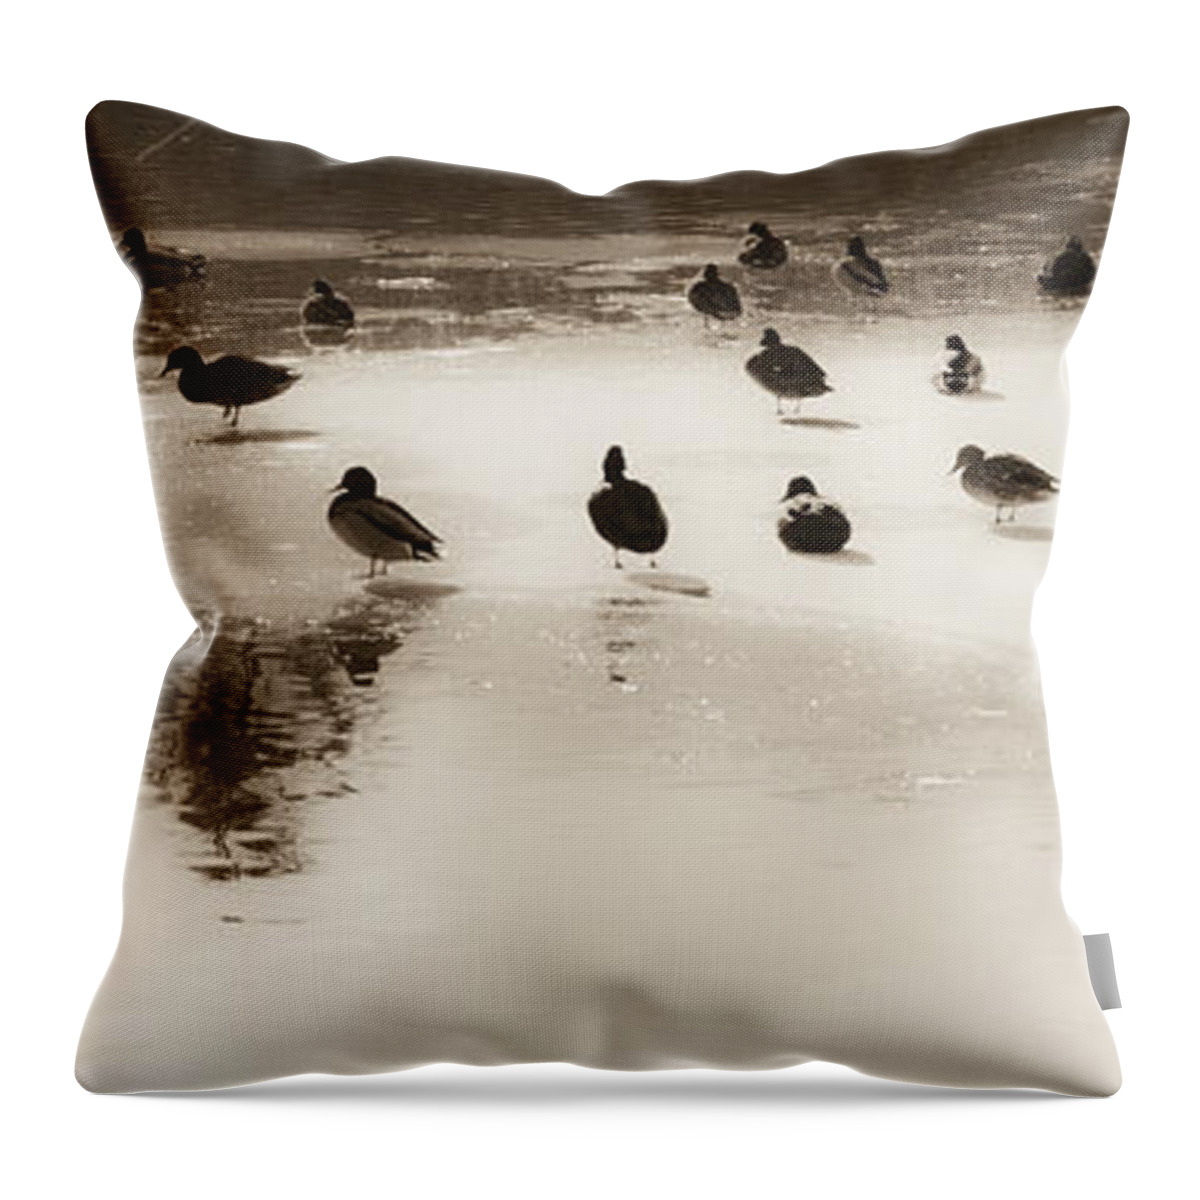 Water Throw Pillow featuring the photograph Minden 1 by Catherine Sobredo